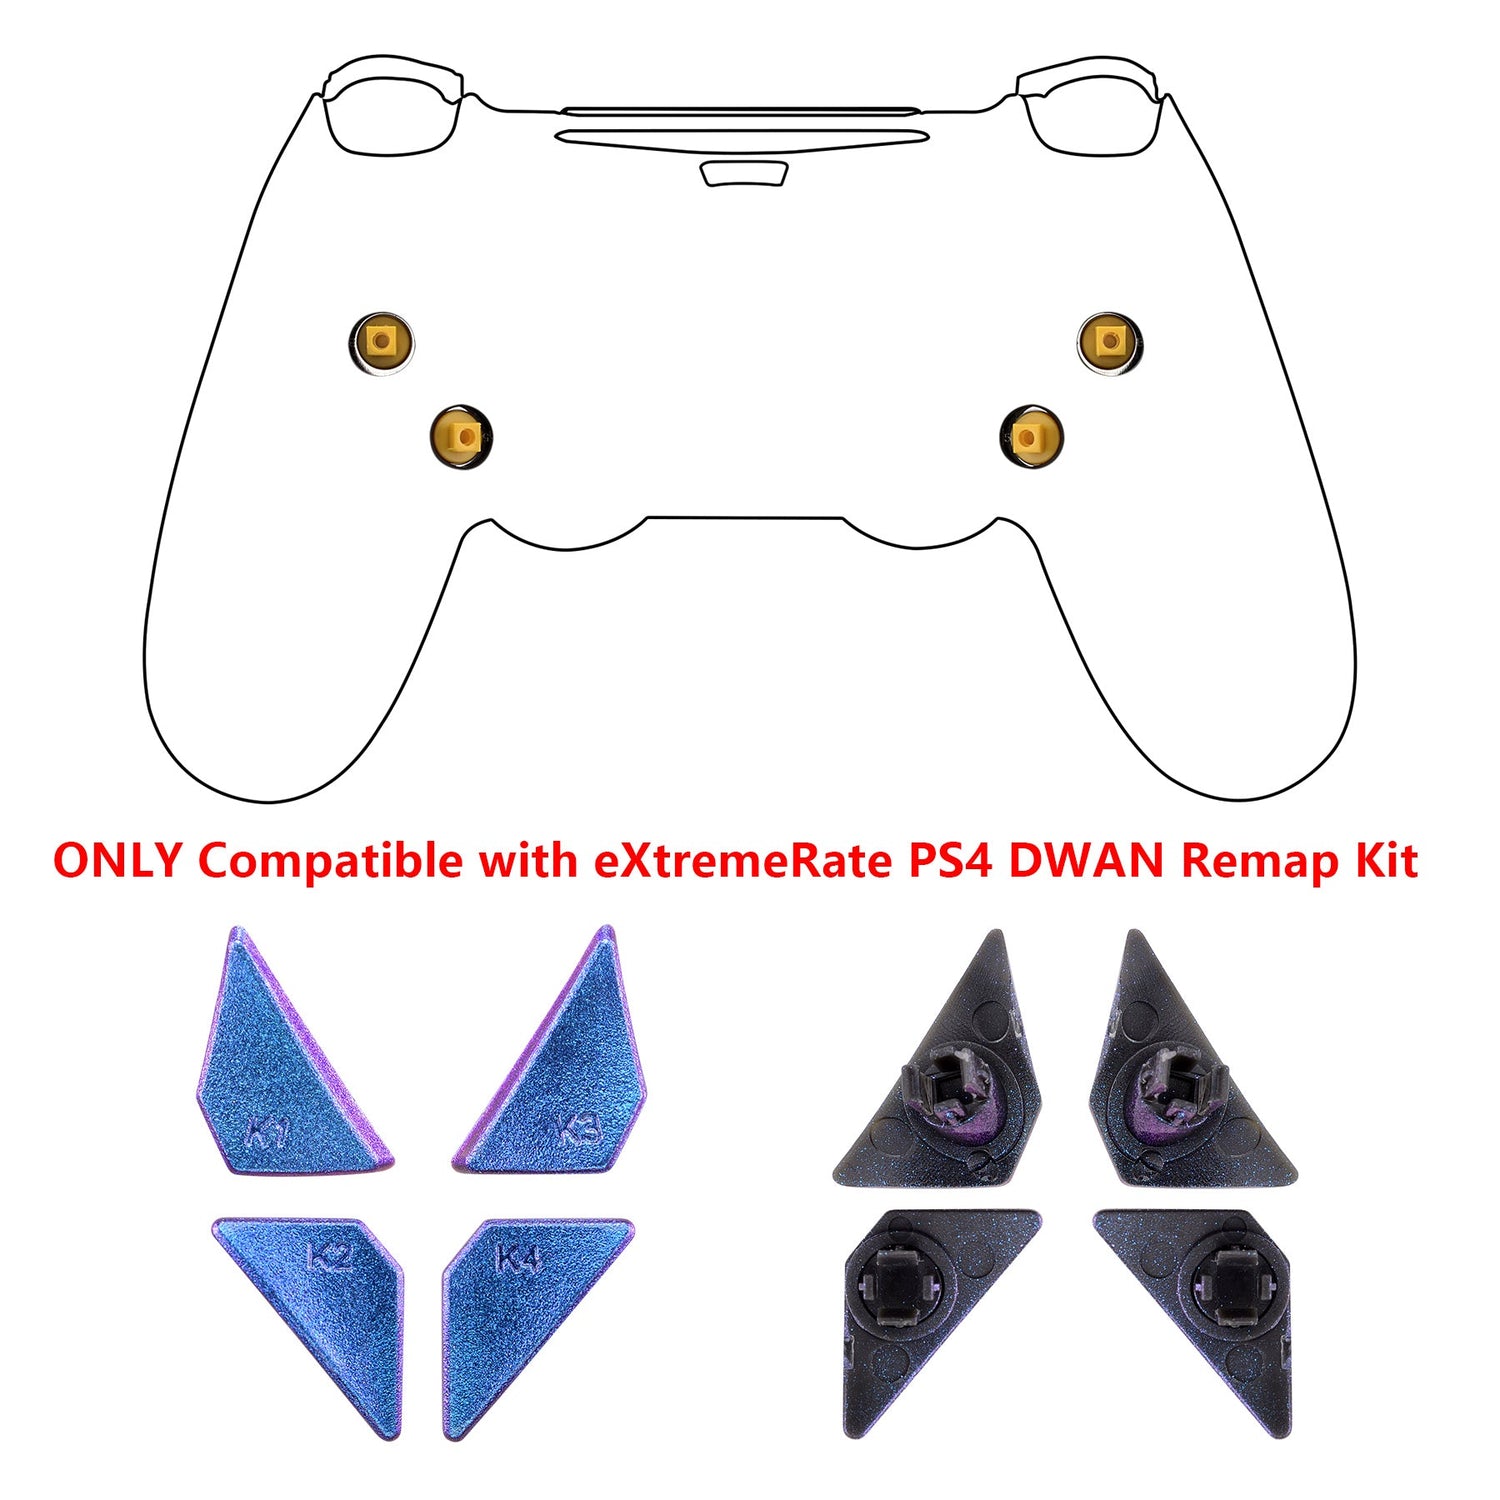 eXtremeRate Retail Purple Blue Chameleon Glossy Replacement Redesigned Back Buttons K1 K2 K3 K4 Paddles for eXtremeRate ps4 Controller Dawn Remap Kit - P4GZ015